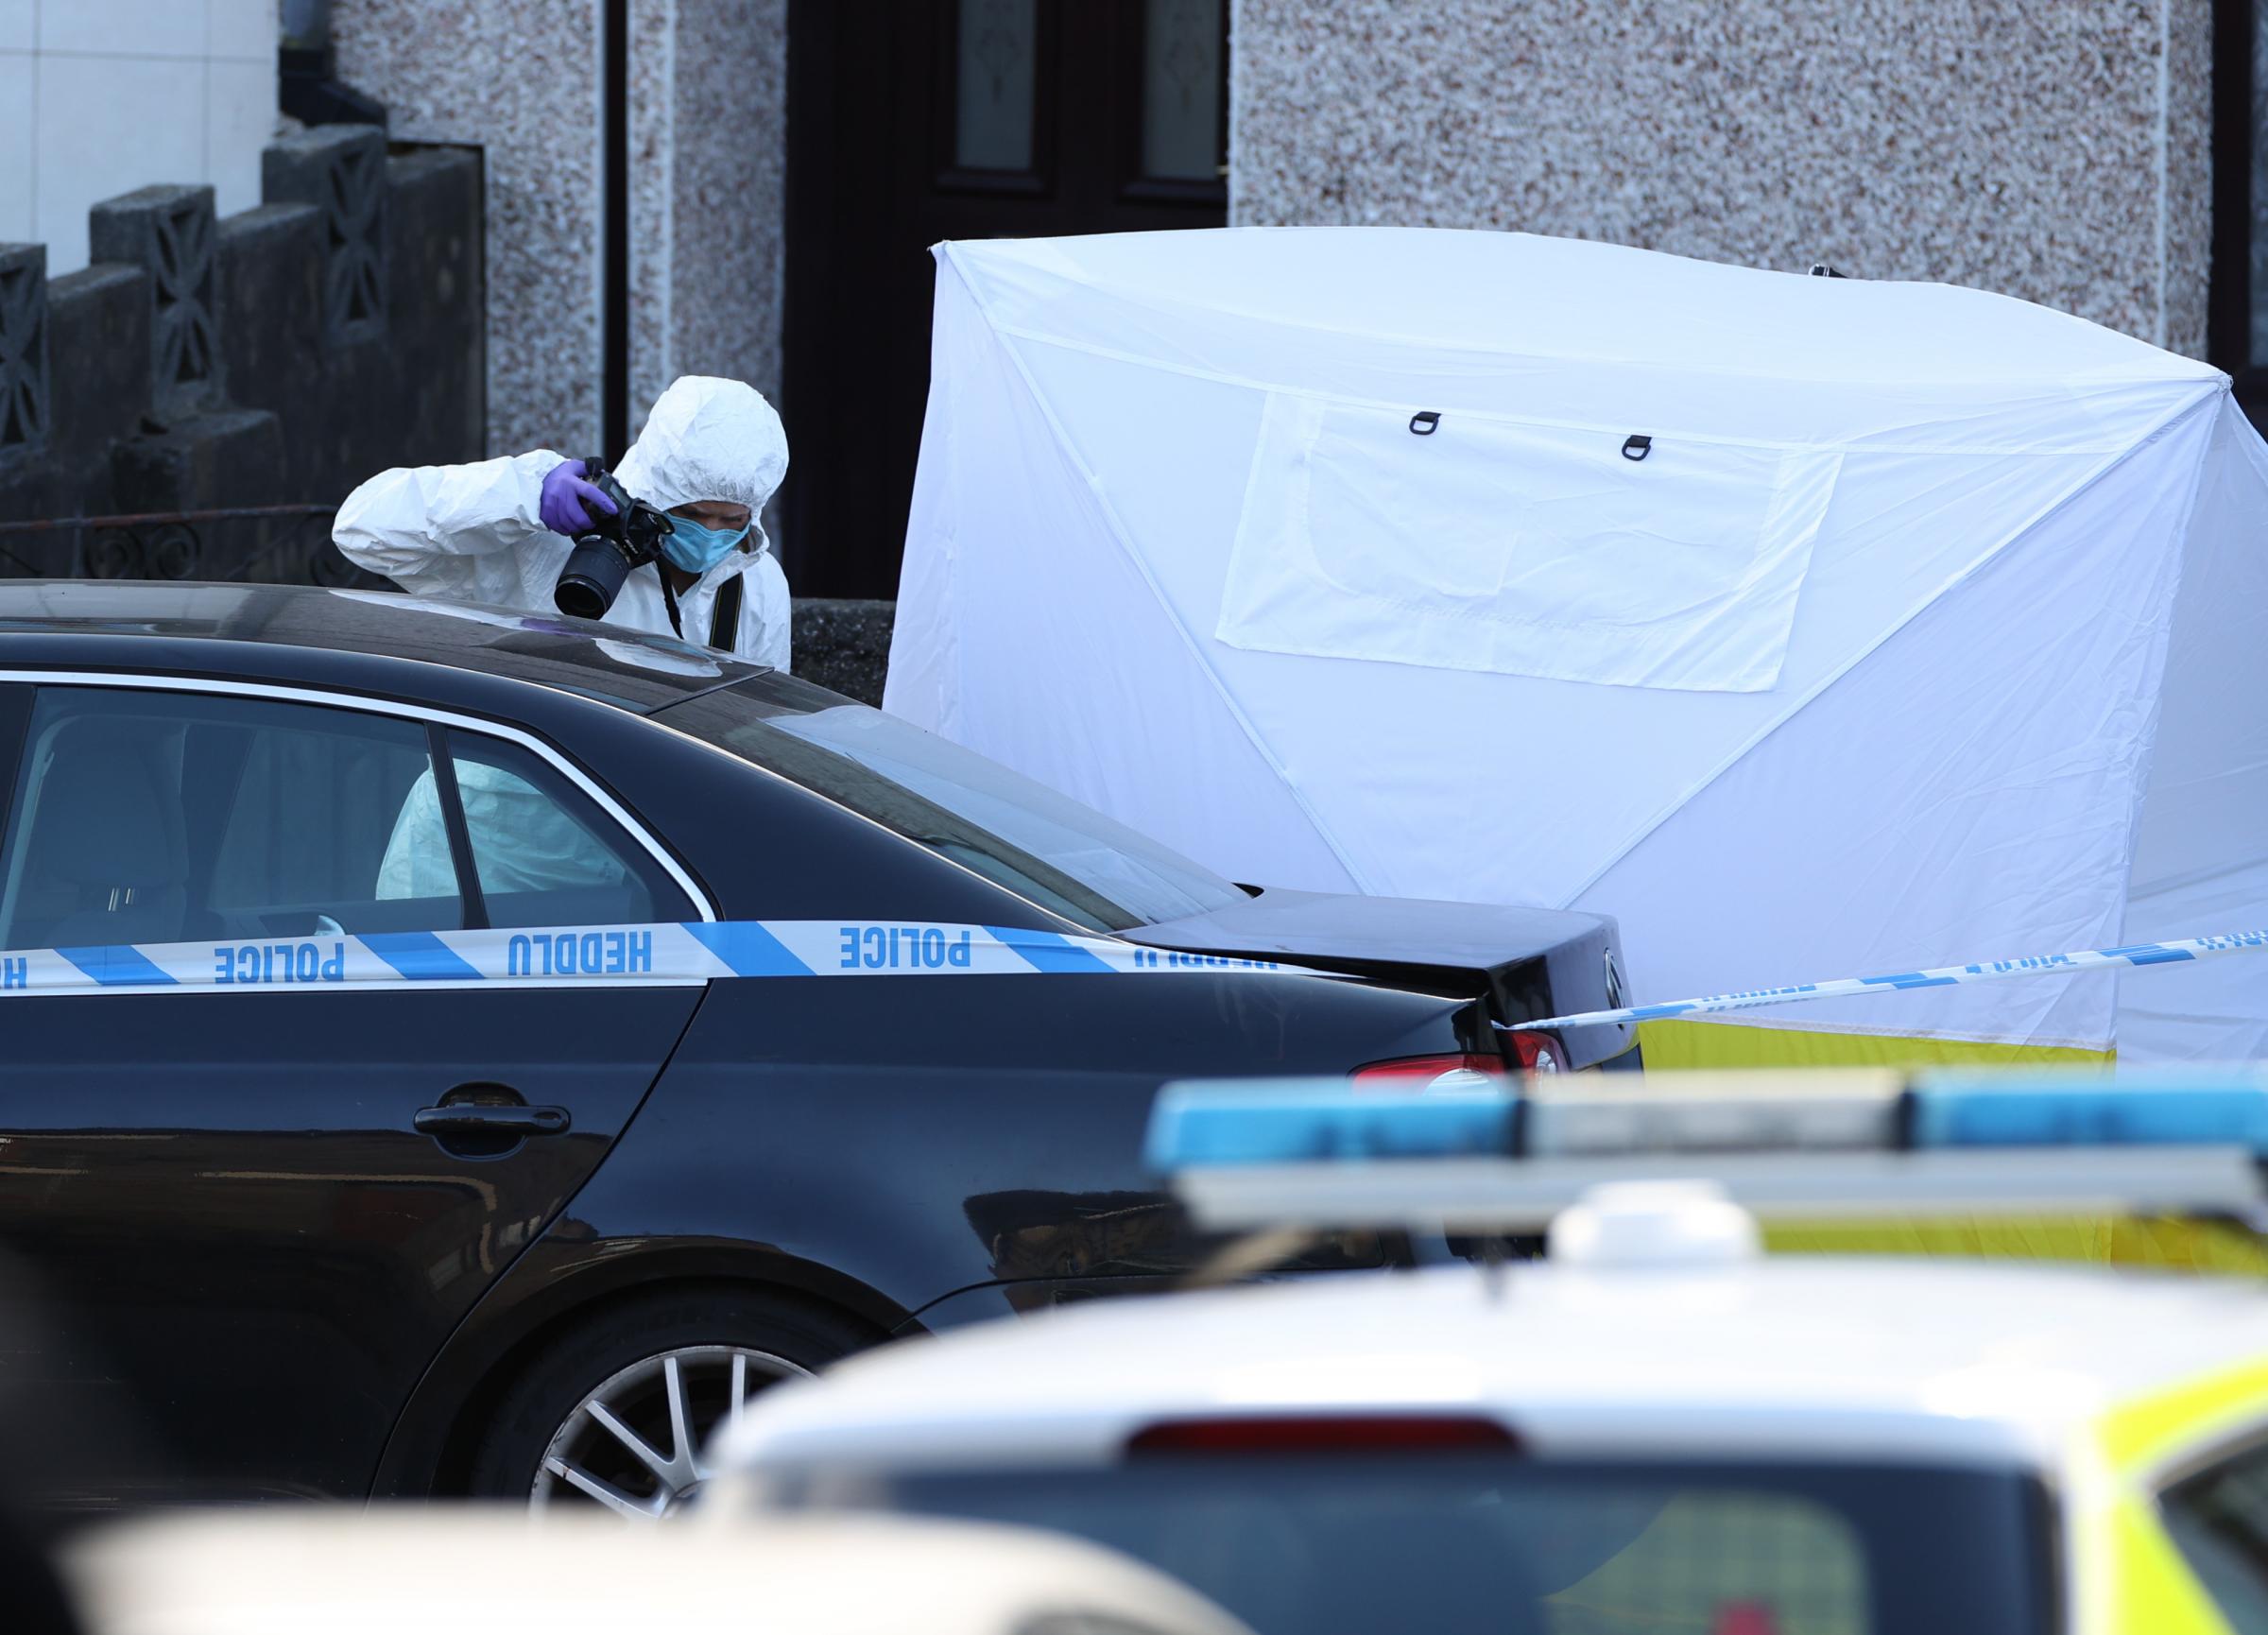 05.03.21 Police Incident, Rhonnda -Police forensic examiners at the scene of serious incident involving a number of casualties outside the Blue Sky takeaway on Baglan Street in Treorchy, Rhondda, South Wales. Credit: Huw Evans Picture Agency